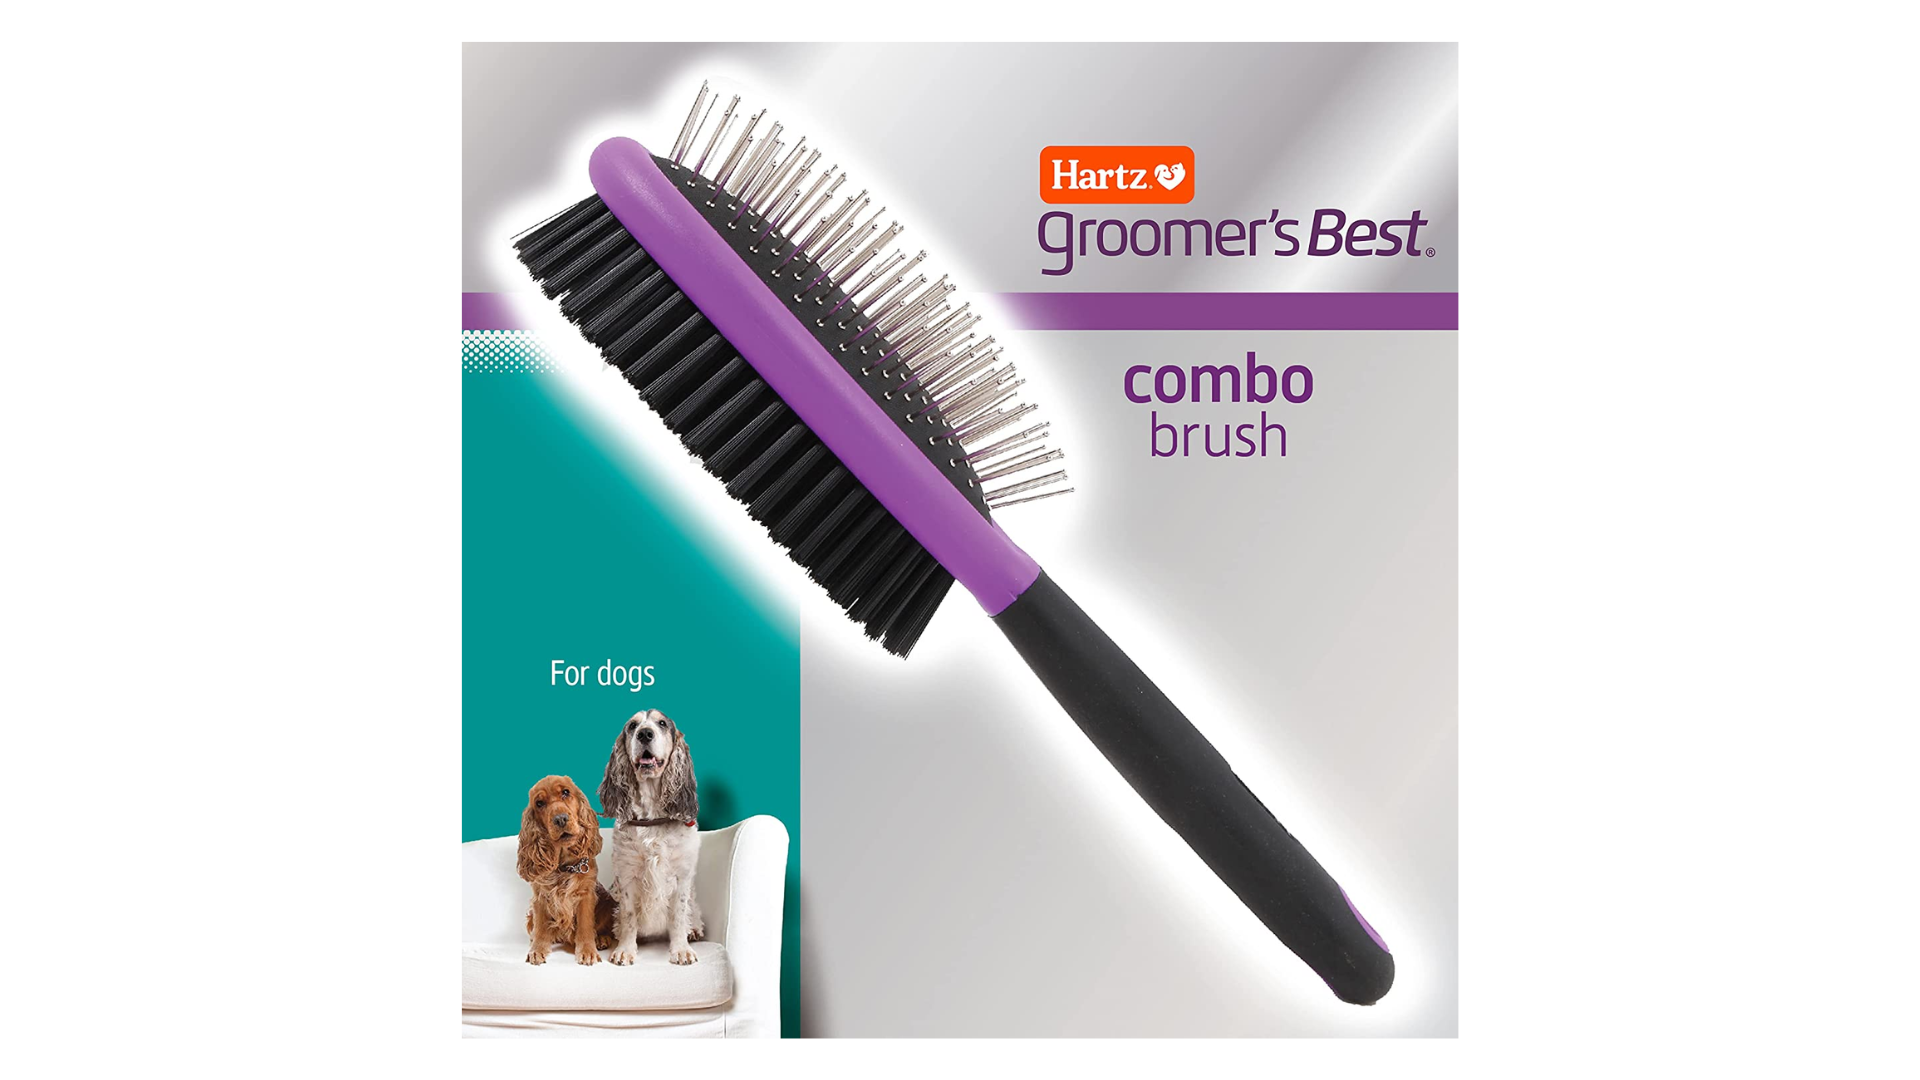 dog brushes, dog brush, dog's skin, slicker brush, loose hair, pin brush, best dog brushes, dead hair, smooth coated dogs, remove loose hair, short haired dogs, curly coats